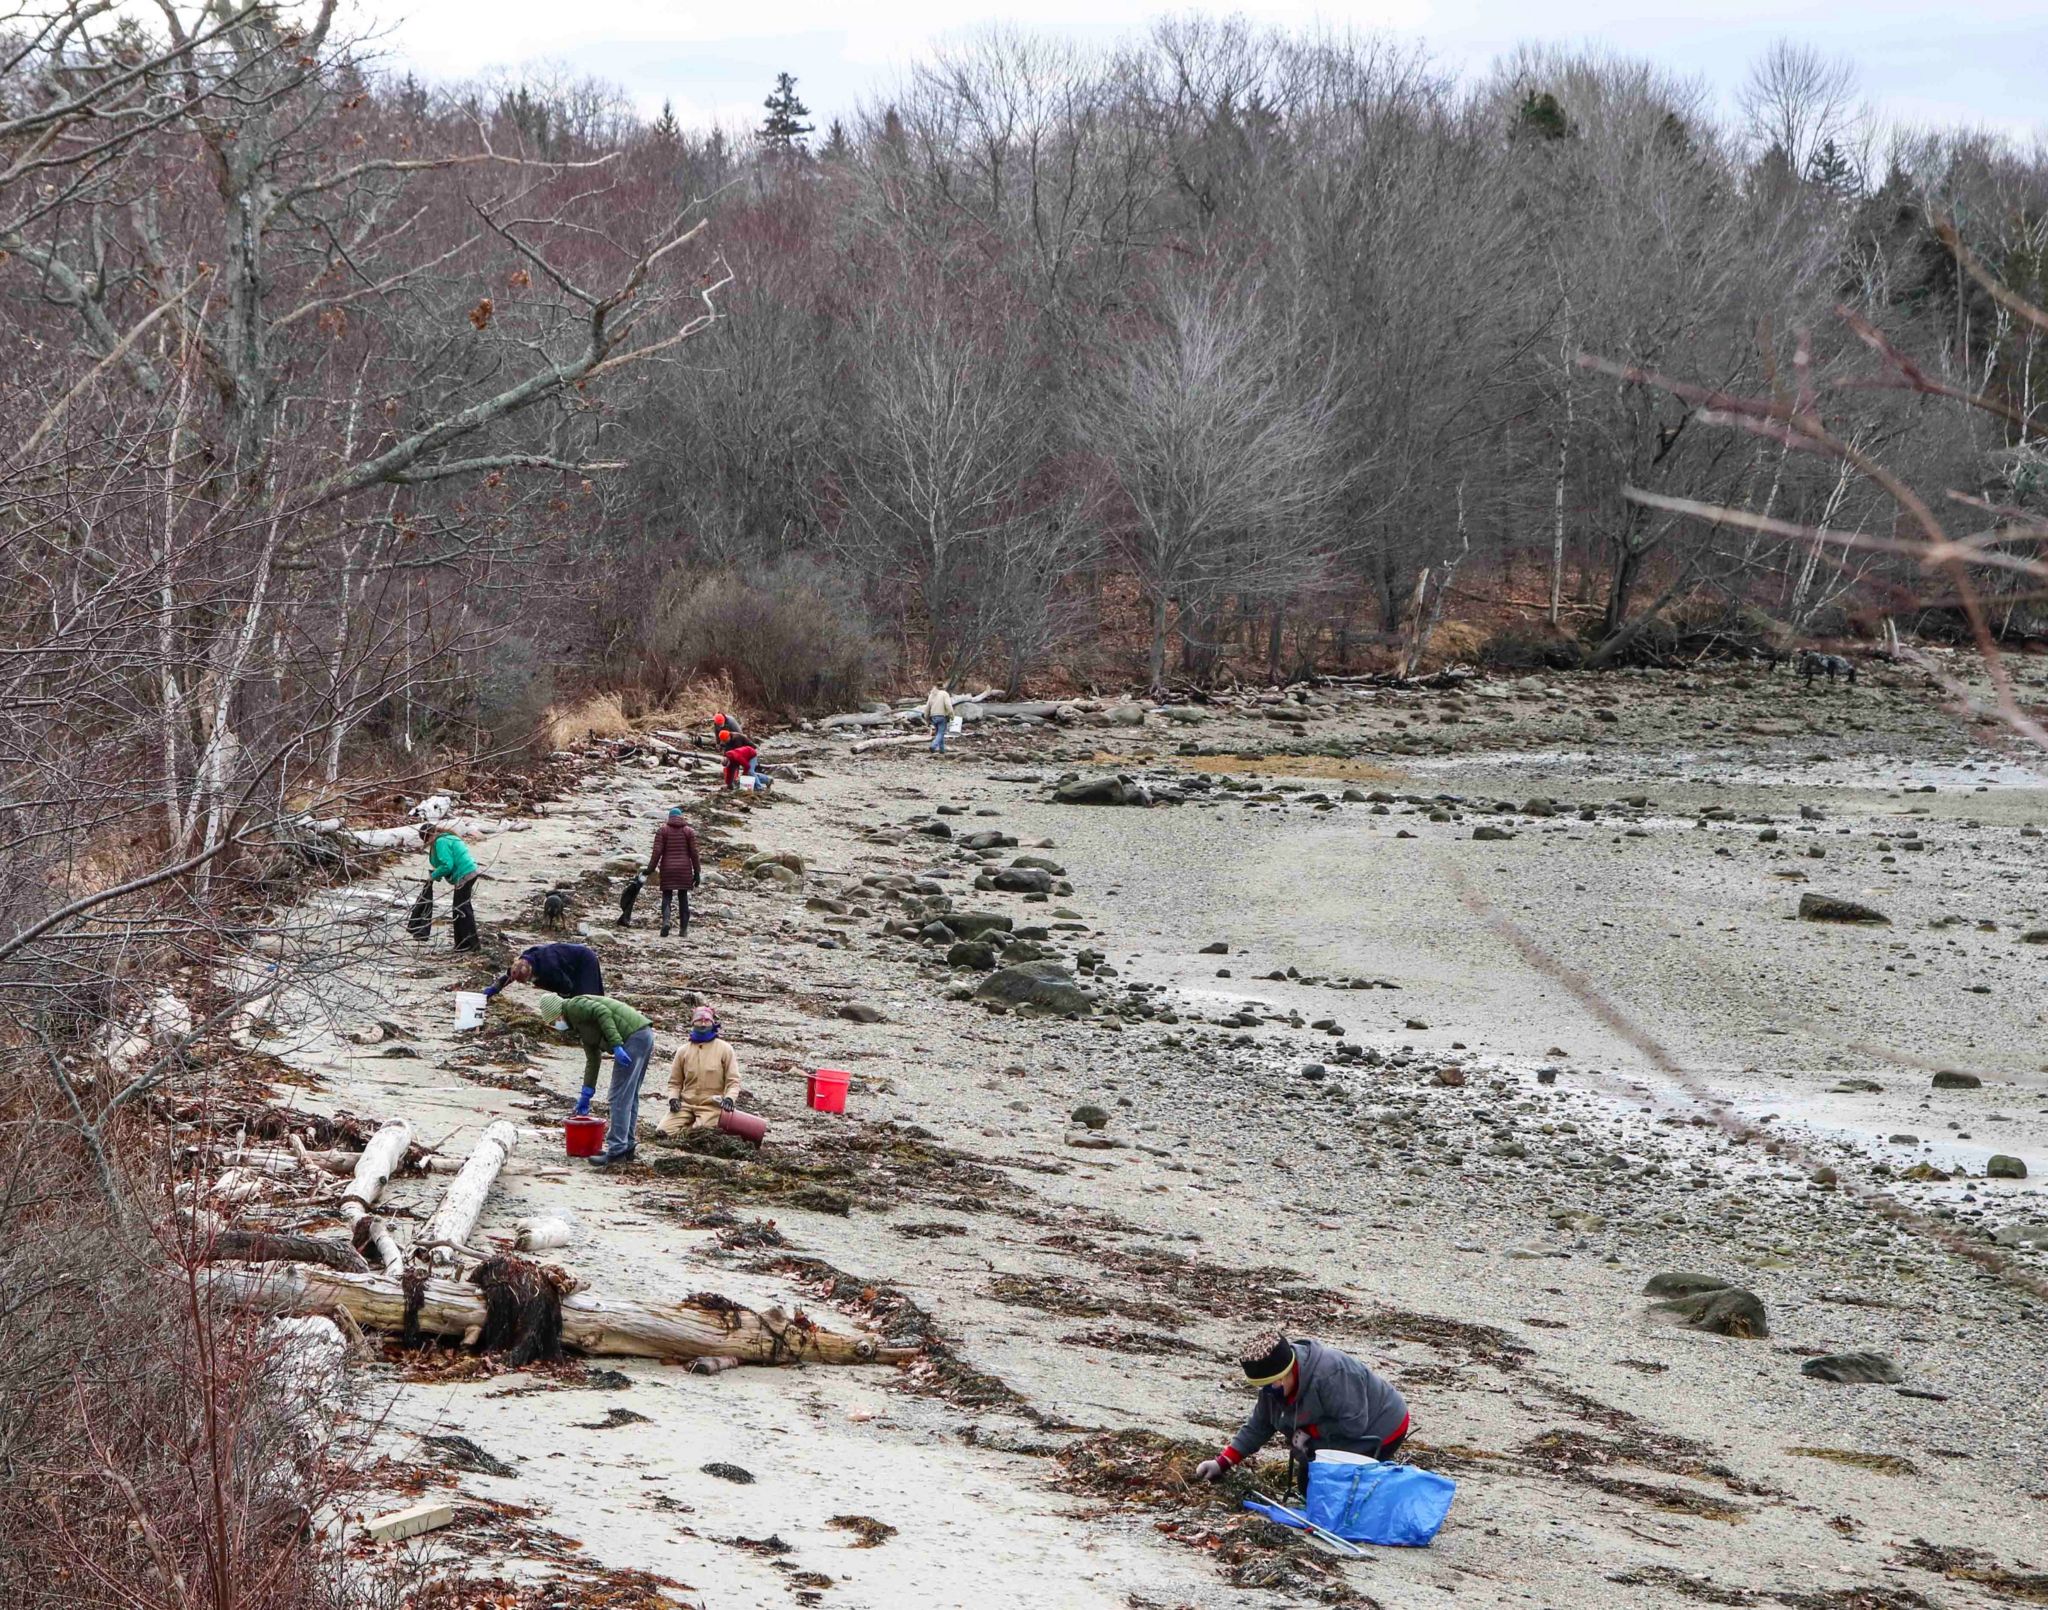 People spread out along a beach picking up plastic litter.